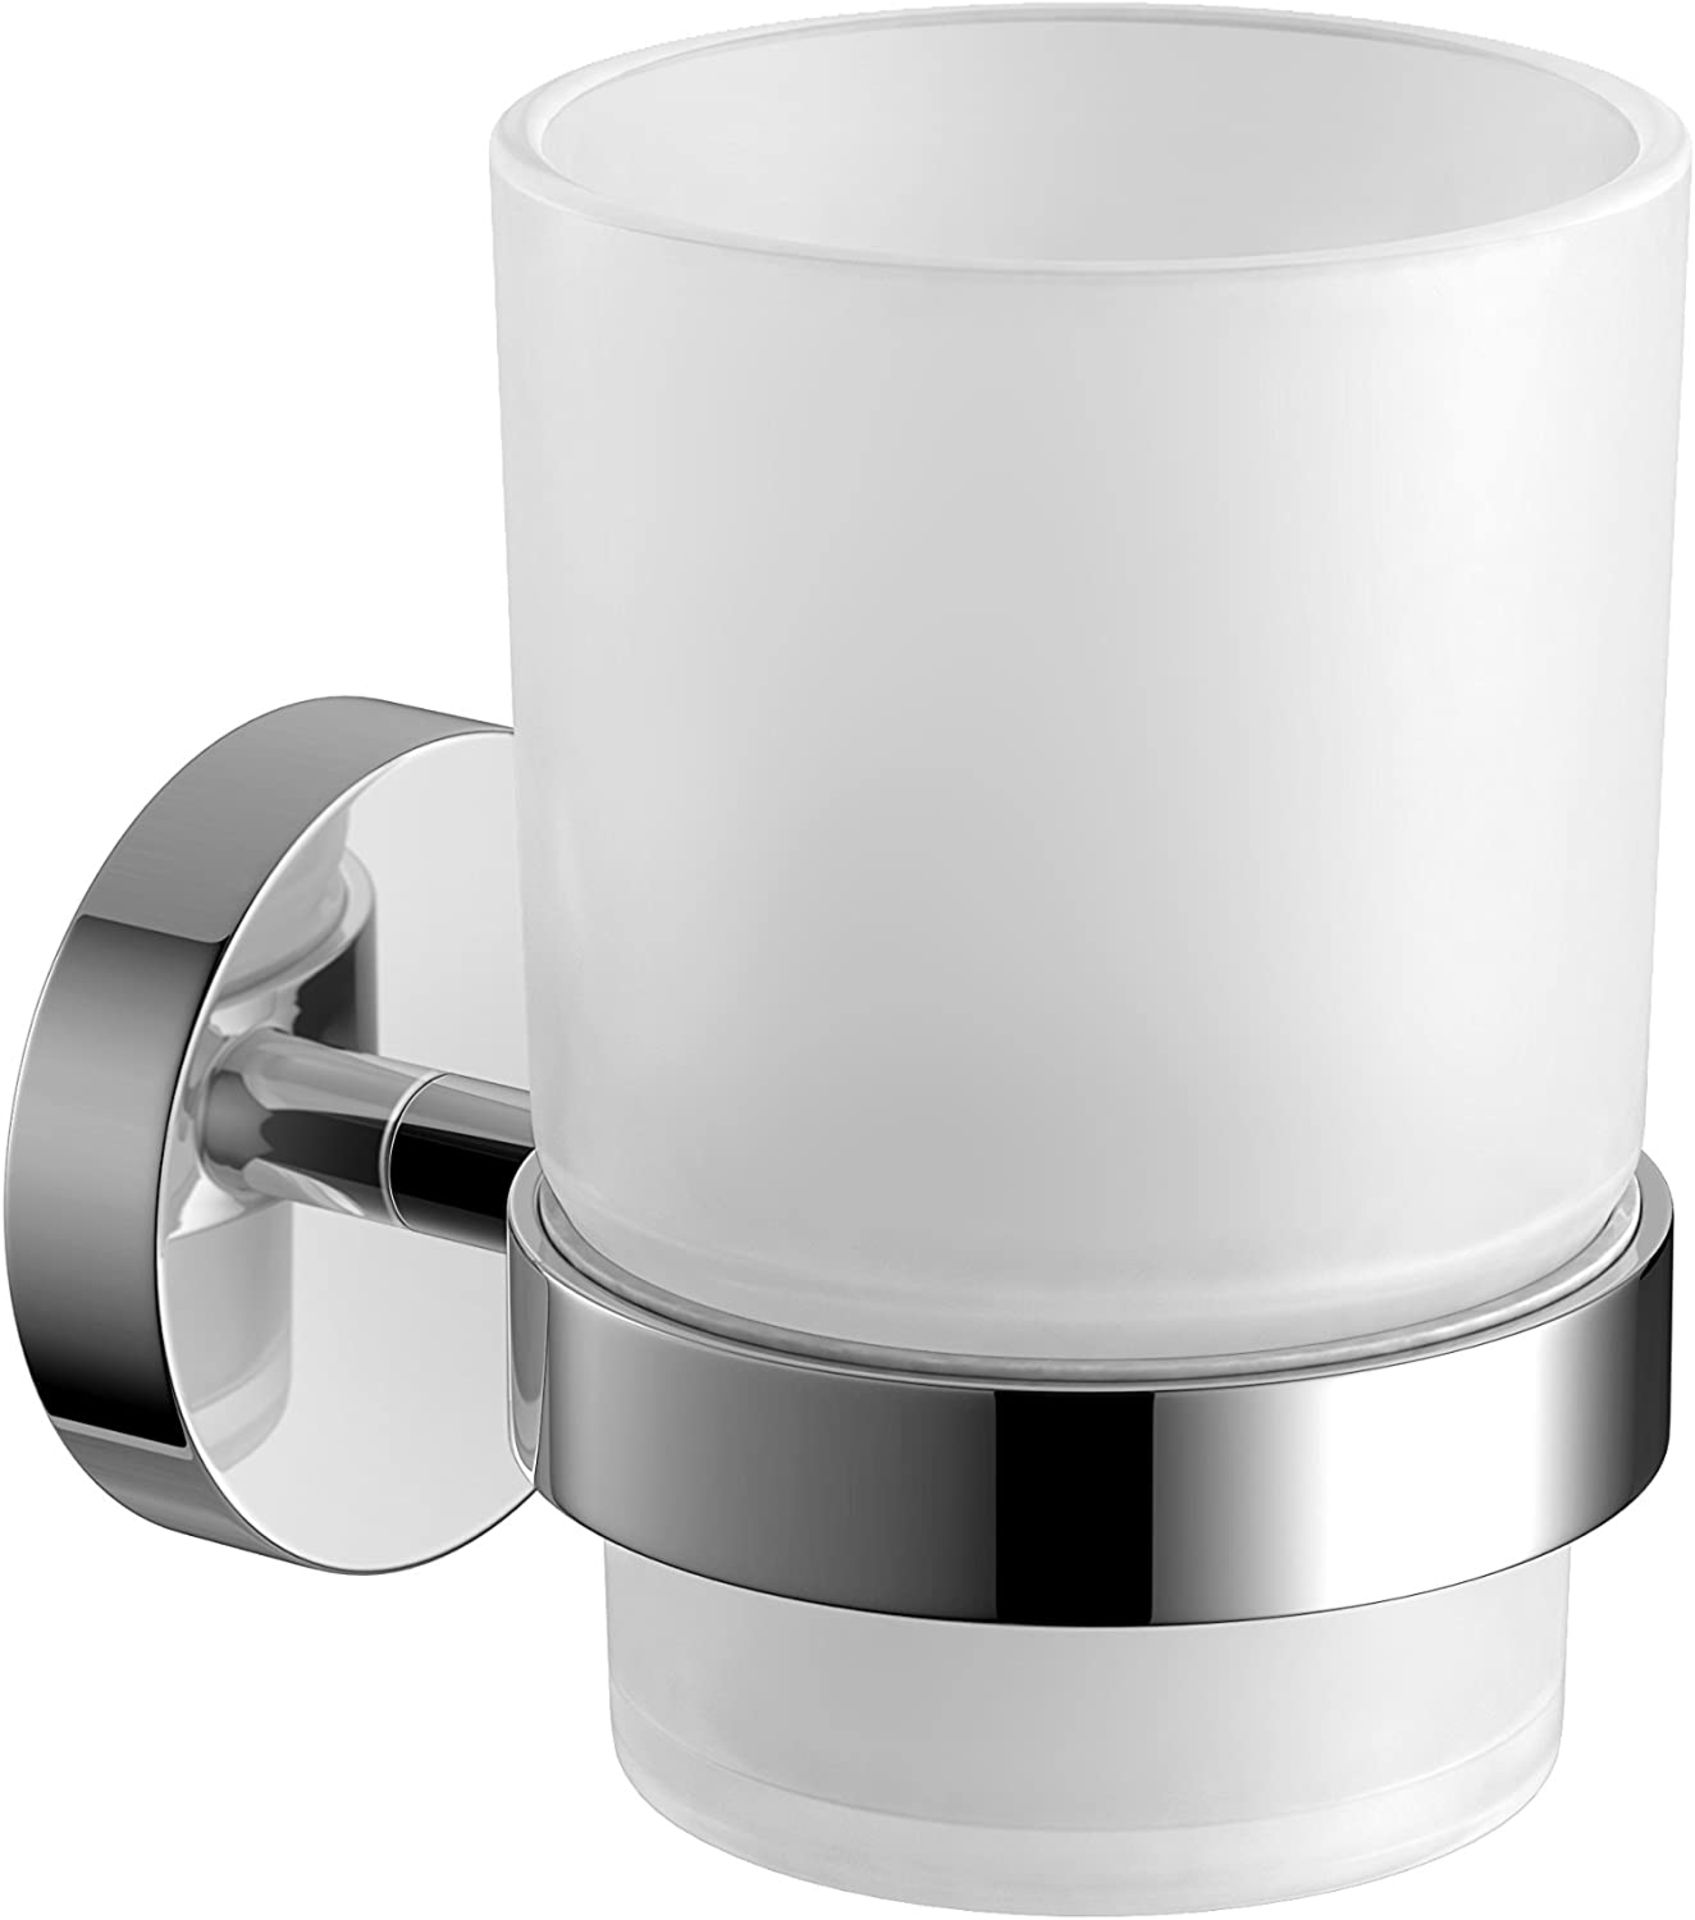 (Q10) Modern Chrome Toothbrush Holder Wall Mounted Tumbler Bathroom Accessory. Fixtures and Fit... - Image 2 of 3